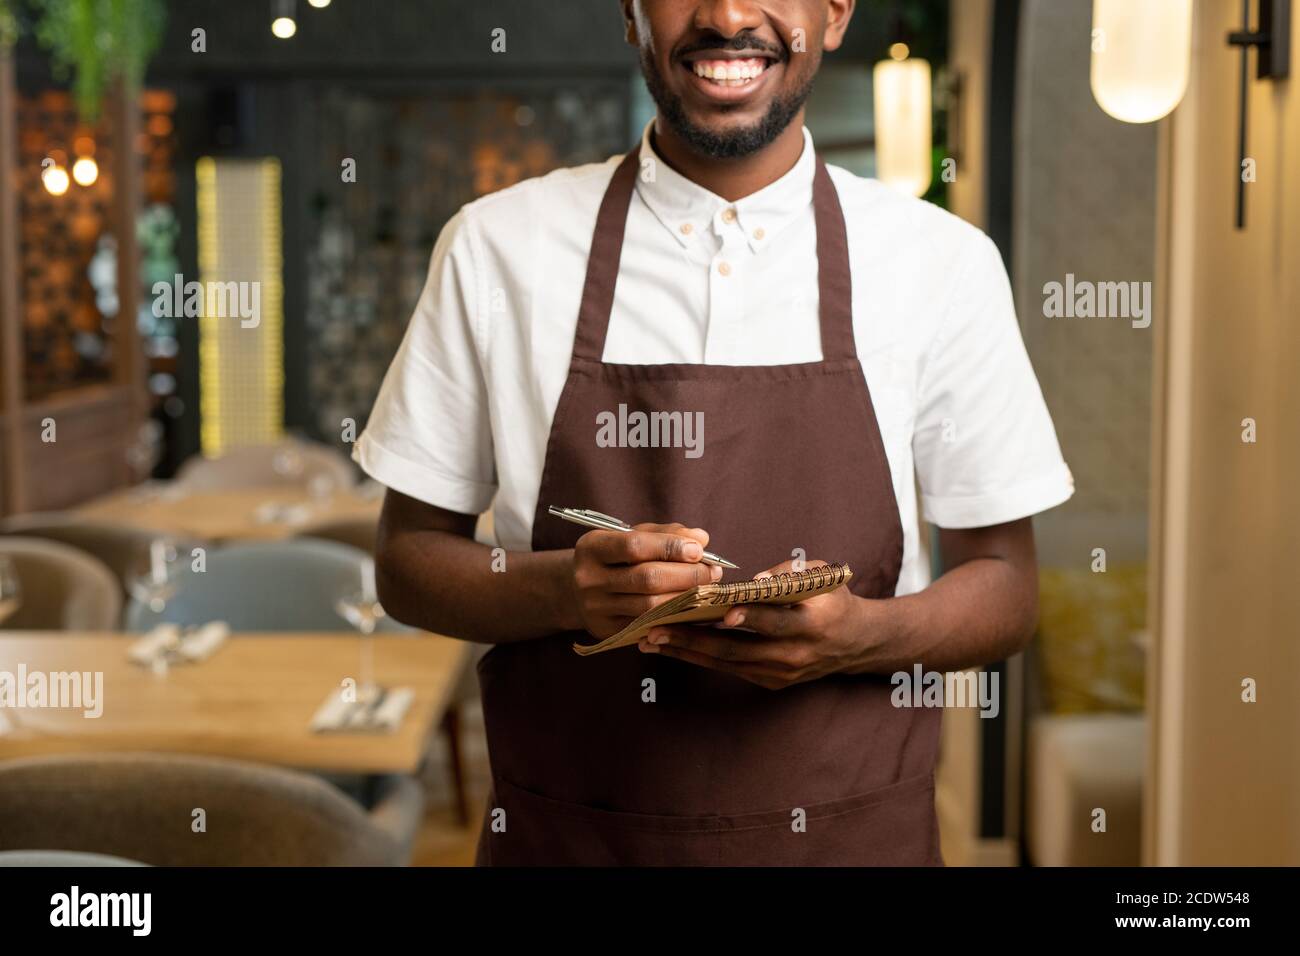 Hands of young waiter with toothy smile holding pen and small notepad Stock Photo